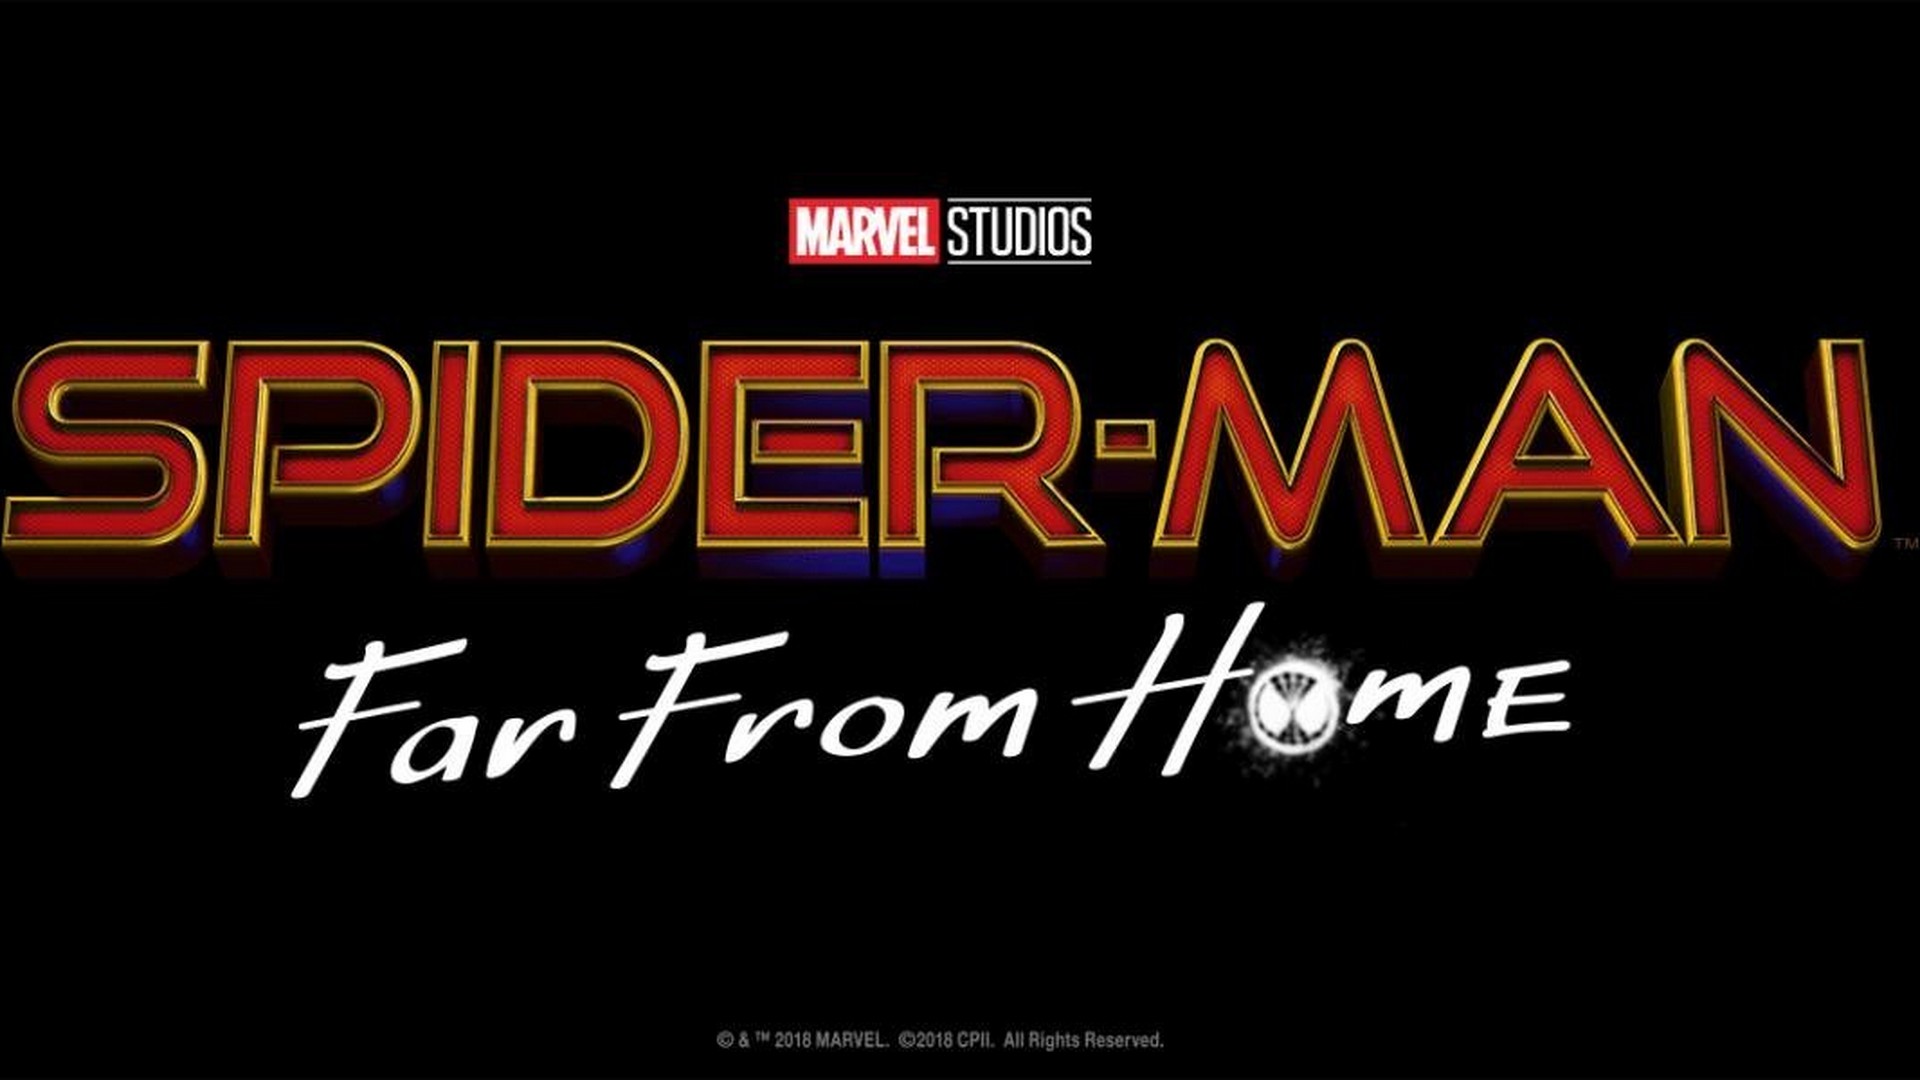 Spider-Man Far From Home Wallpaper with high-resolution 1920x1080 pixel. You can use this wallpaper for your Windows and Mac OS computers as well as your Android and iPhone smartphones